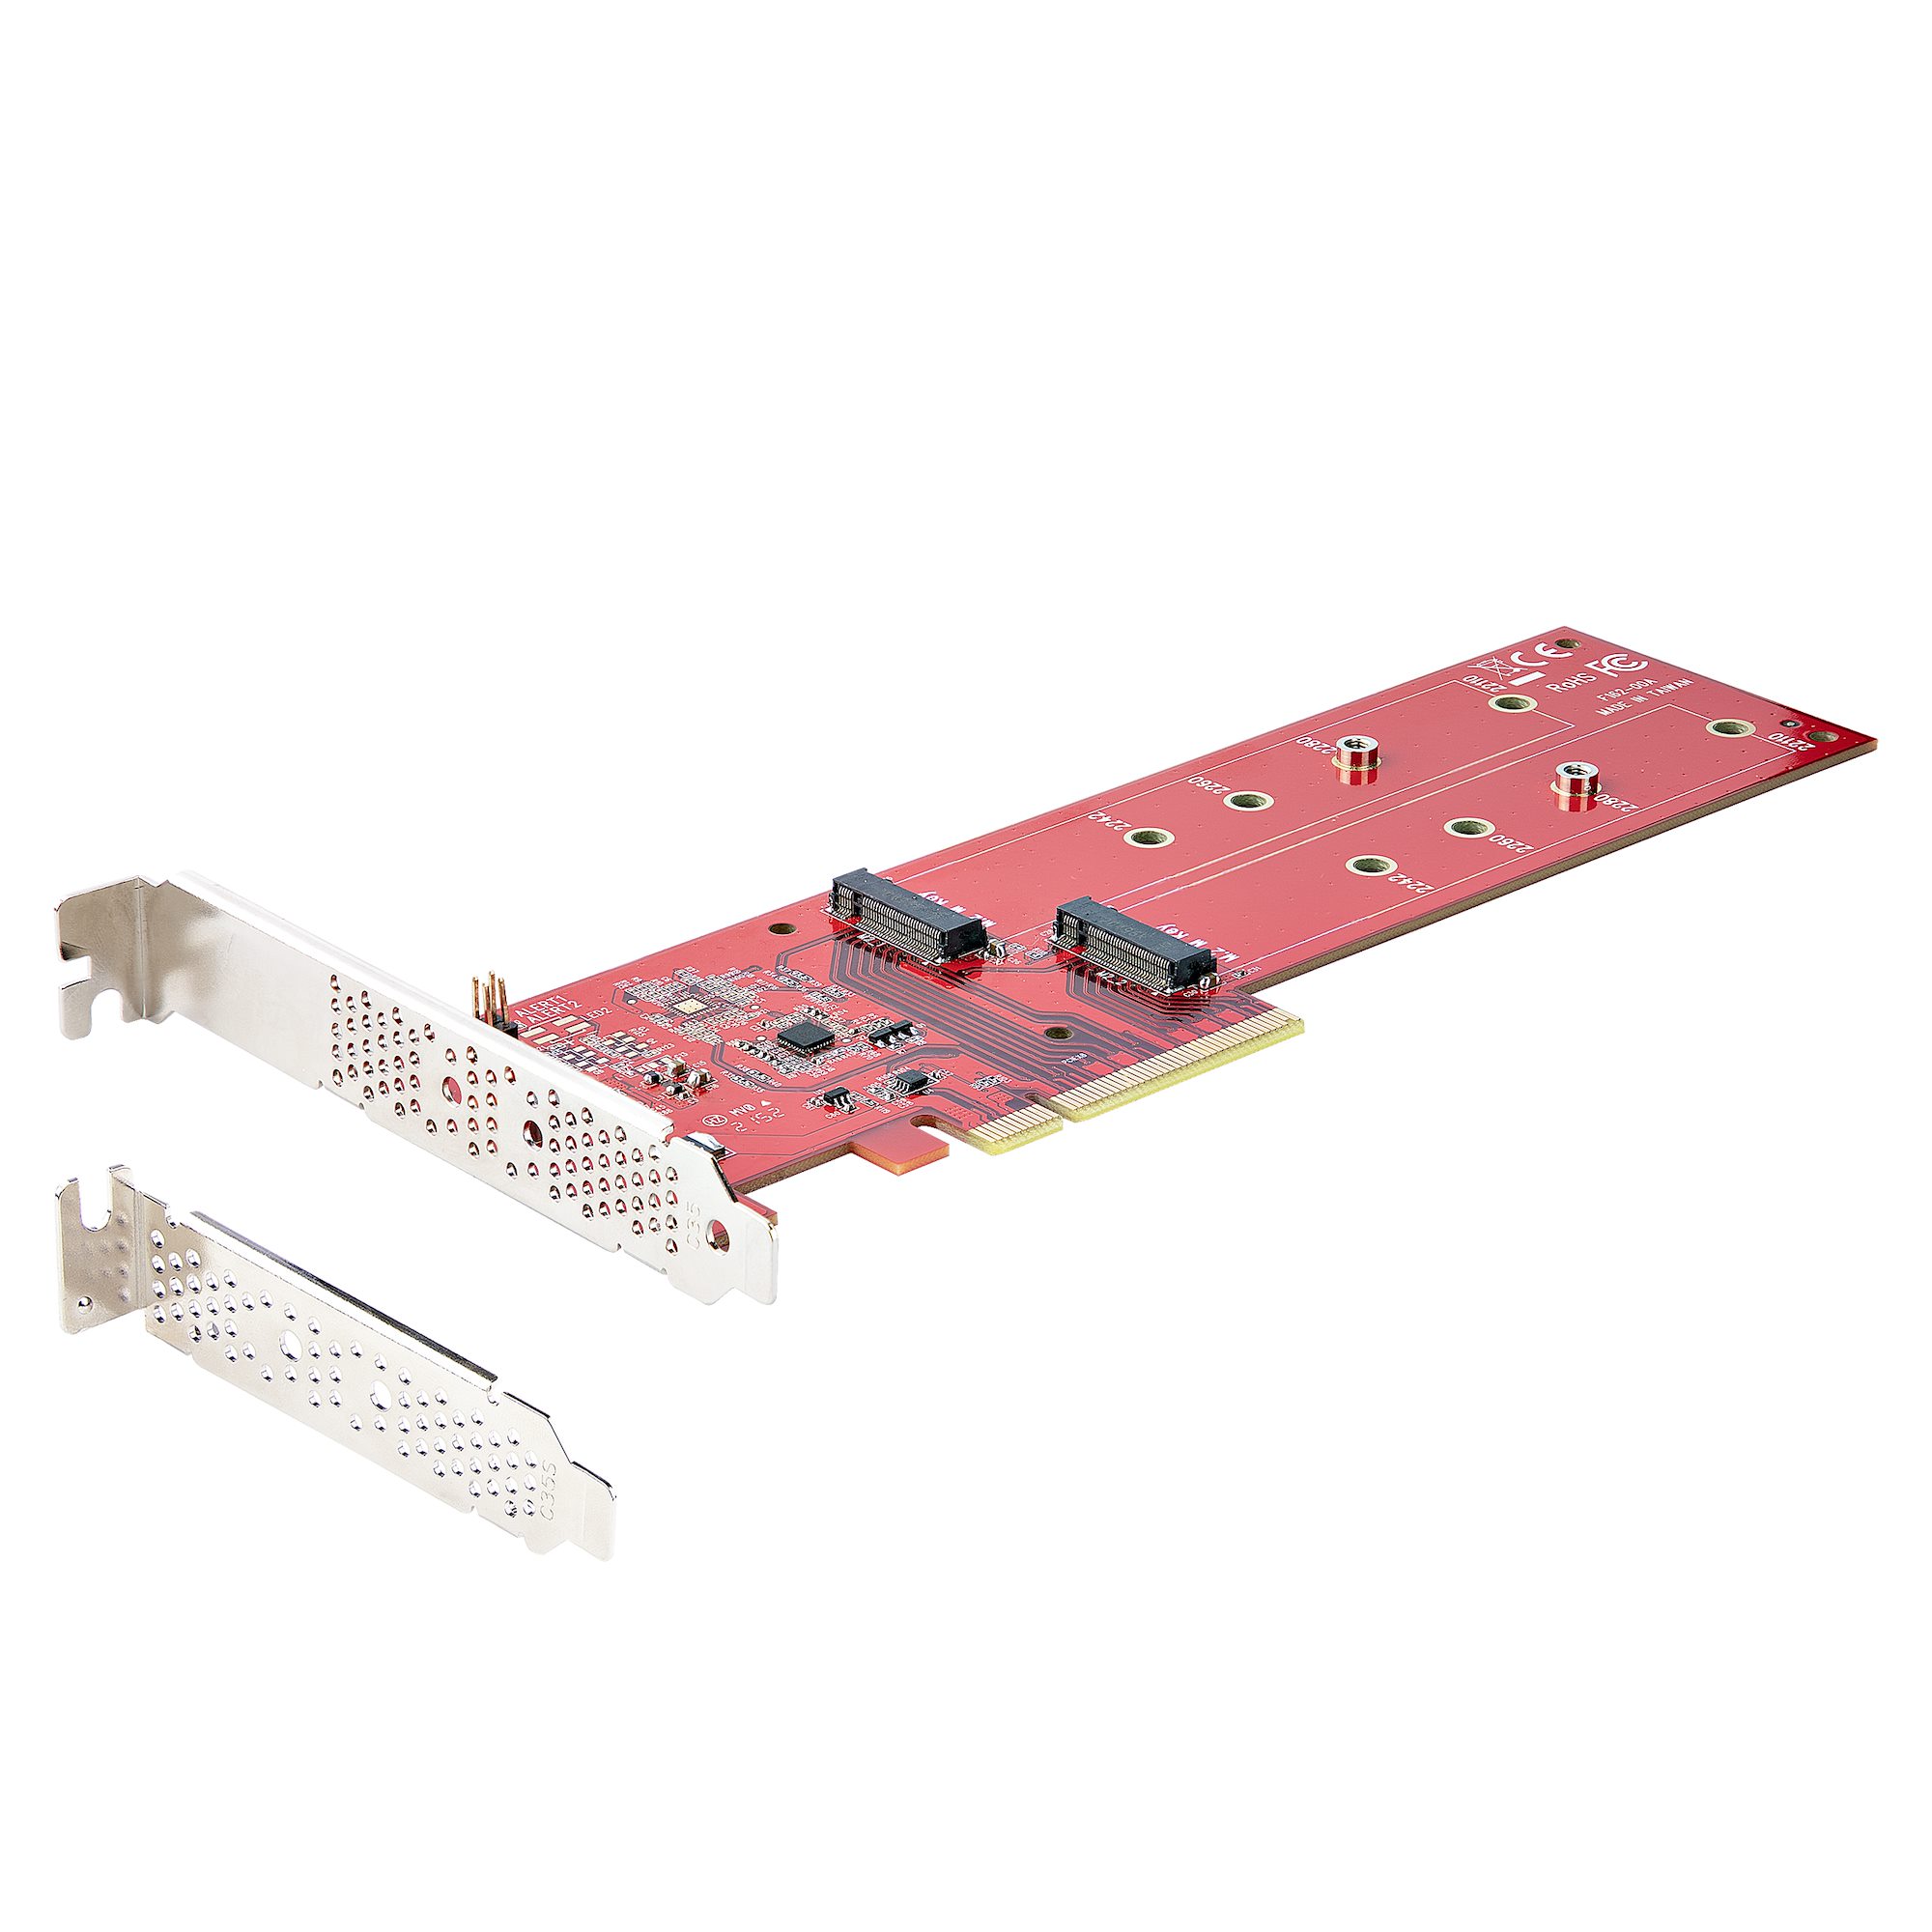 Med andre band Afgørelse ifølge Dual M.2 PCIe SSD Adapter, NVMe / AHCI - Drive Adapters and Drive  Converters | Hard Drive Accessories | StarTech.com